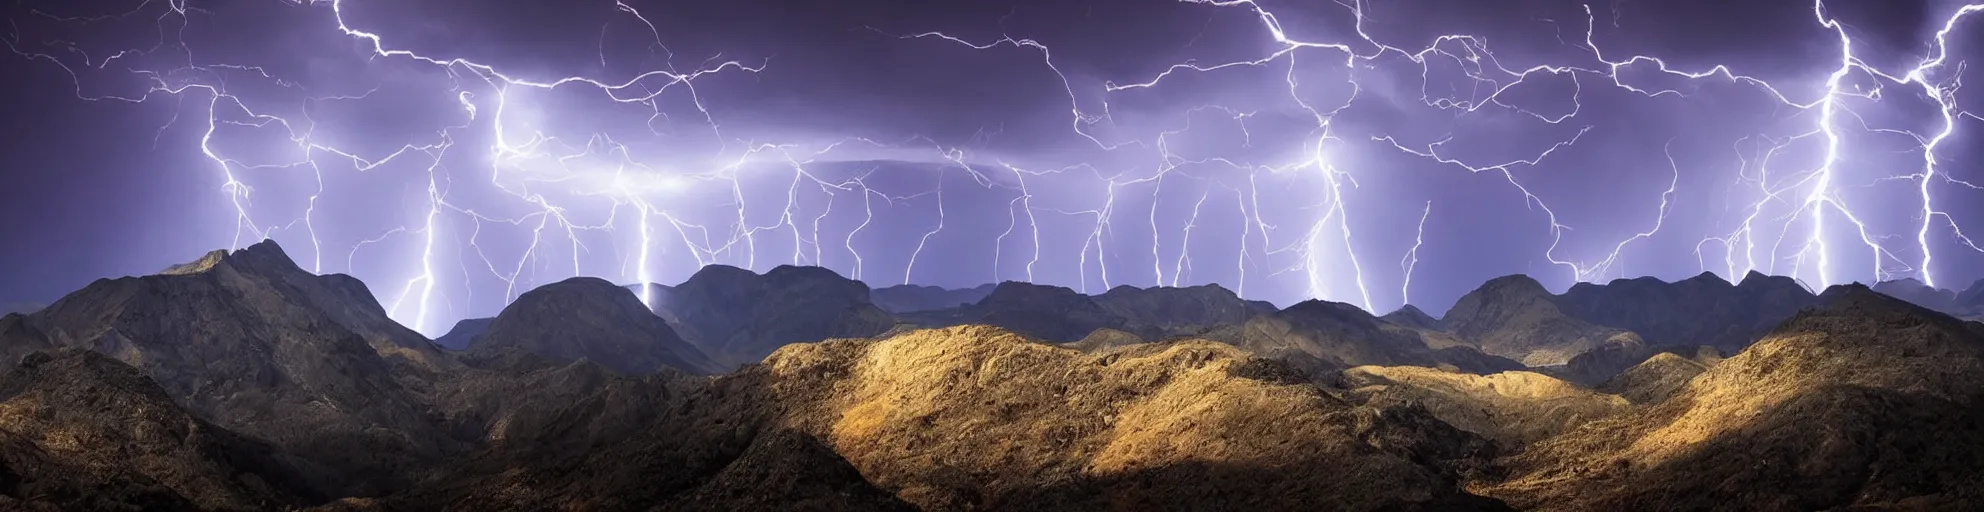 Image similar to solar montain with lightning bolts.